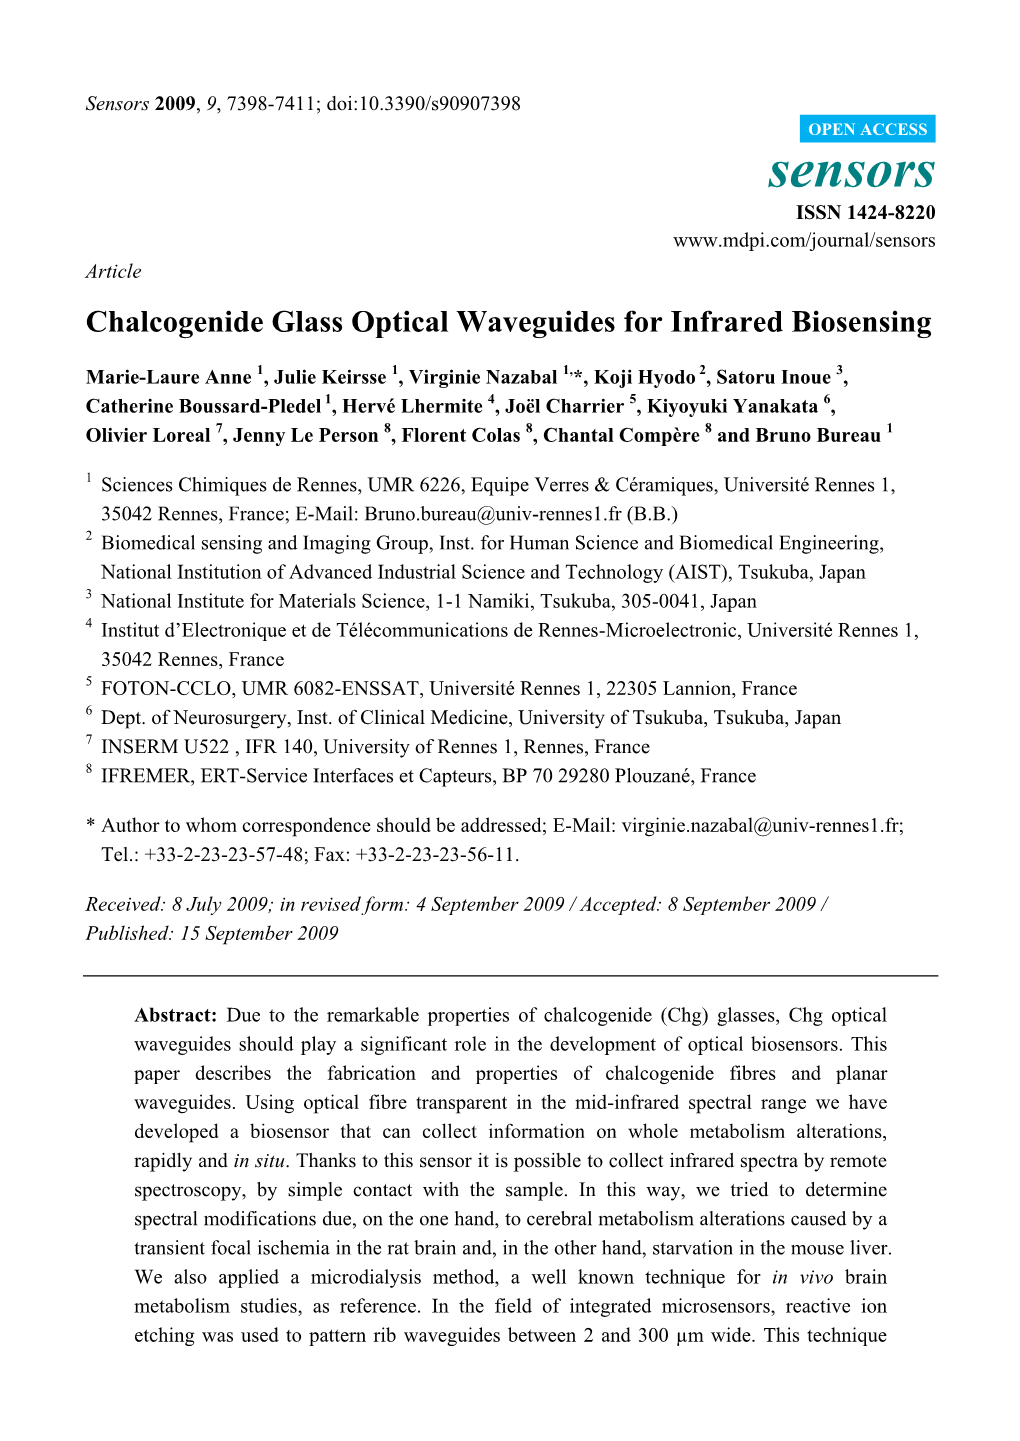 Chalcogenide Glass Optical Waveguides for Infrared Biosensing